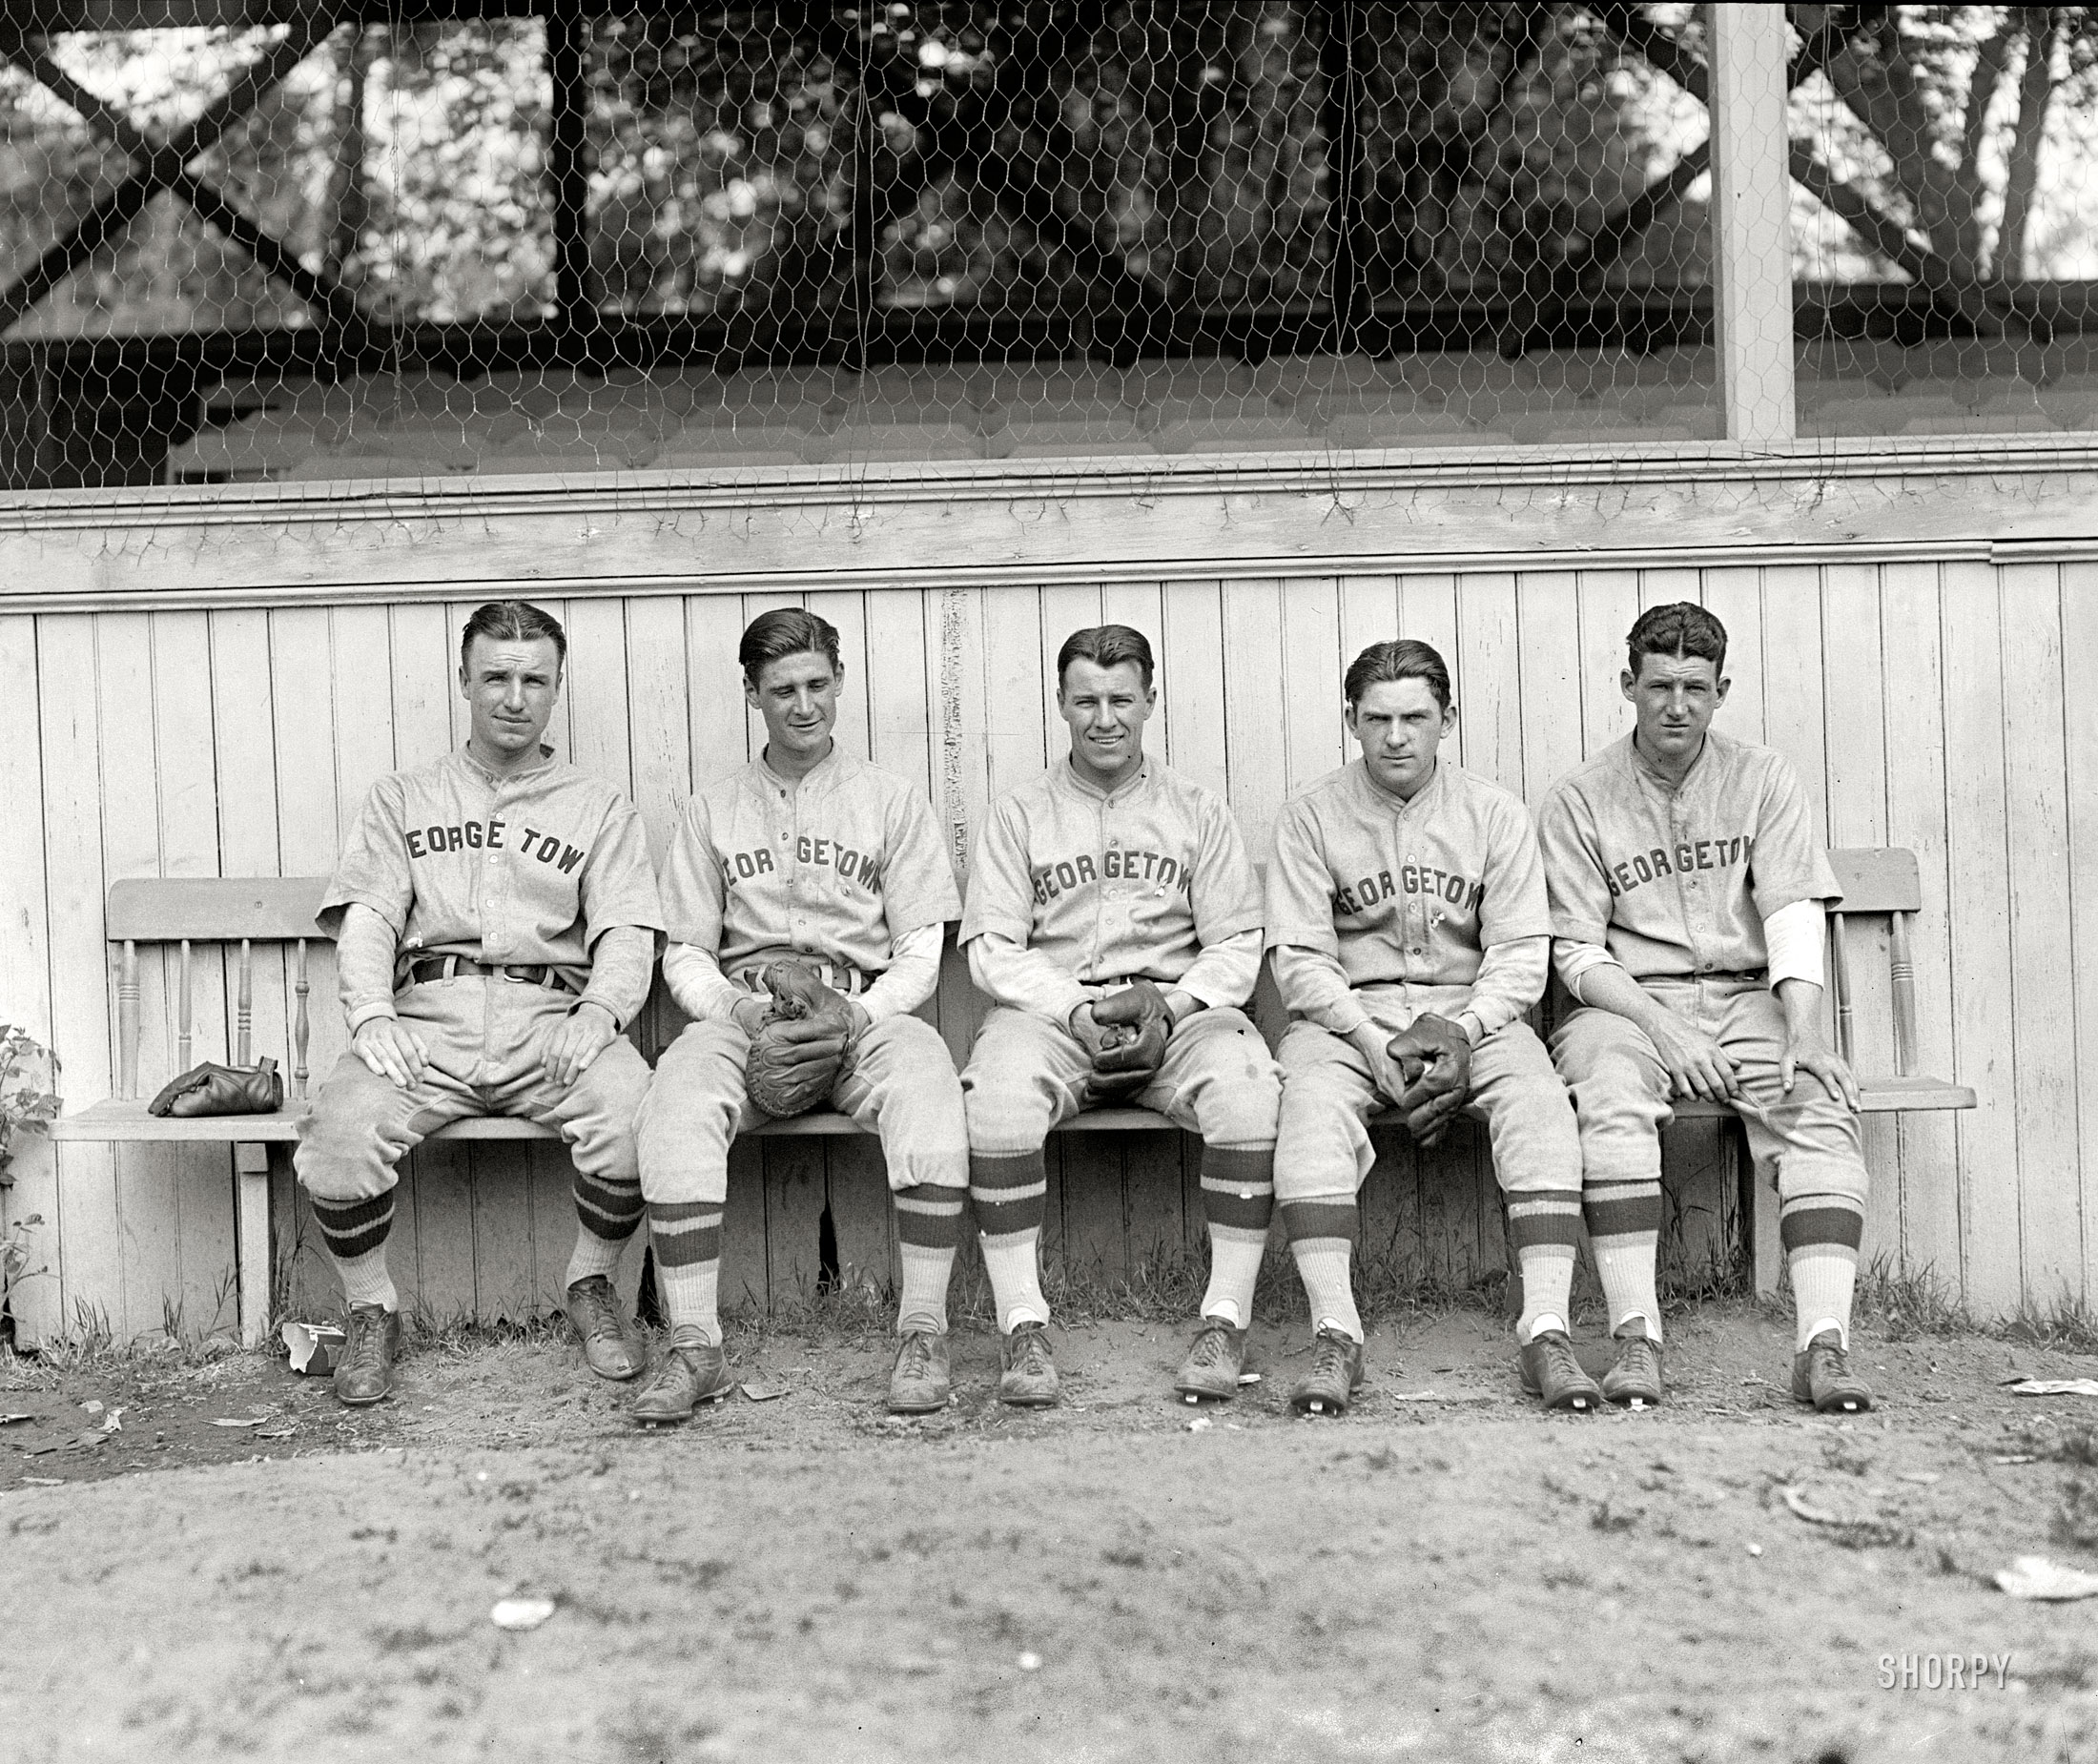 Washington, D.C. "Georgetown U., 1928." A narrow range of parting preferences on view here. National Photo Company Collection glass negative. View full size.